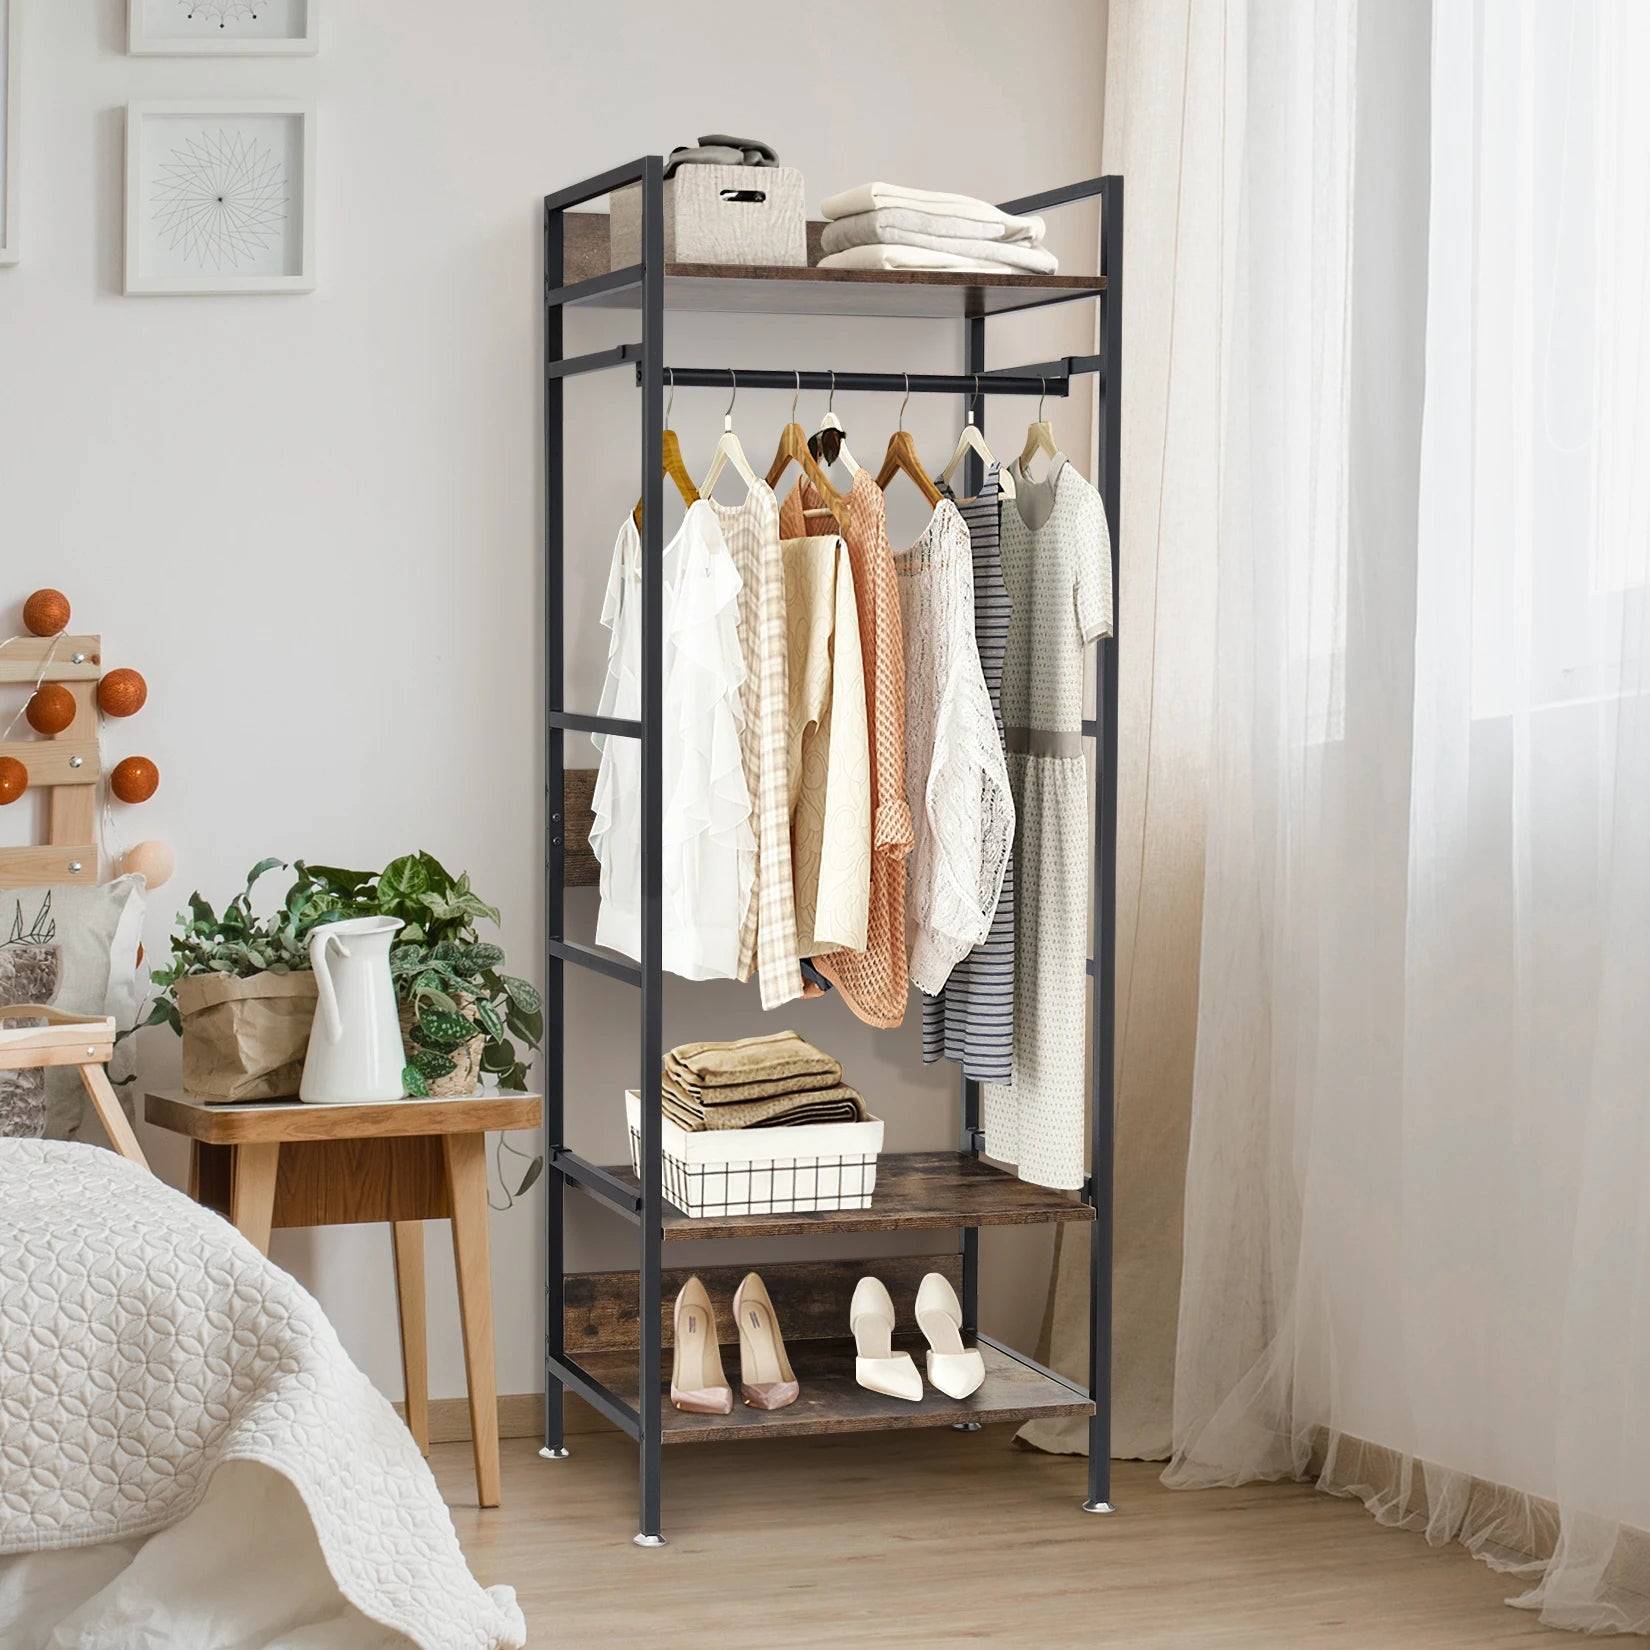 Clothes stand Genevieve with adjustable middle Shelf - Coat Racks - KonnaLiving